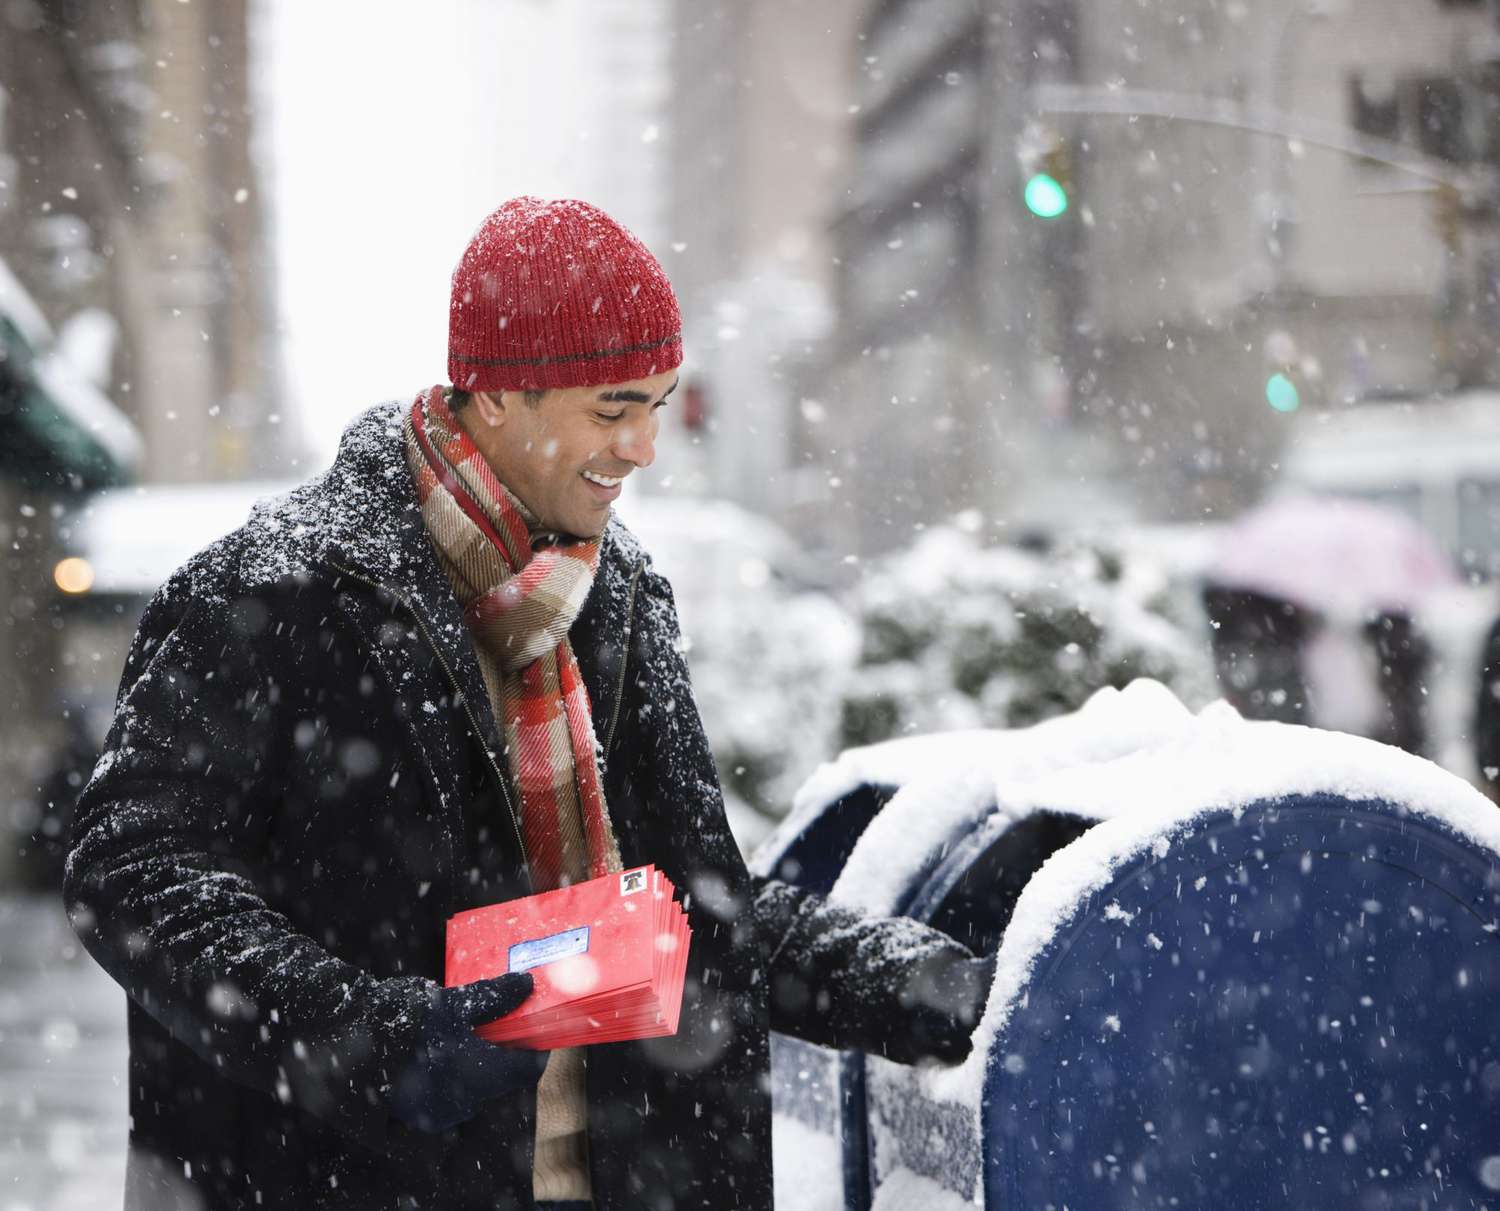 Man mailing Christmas cards in city